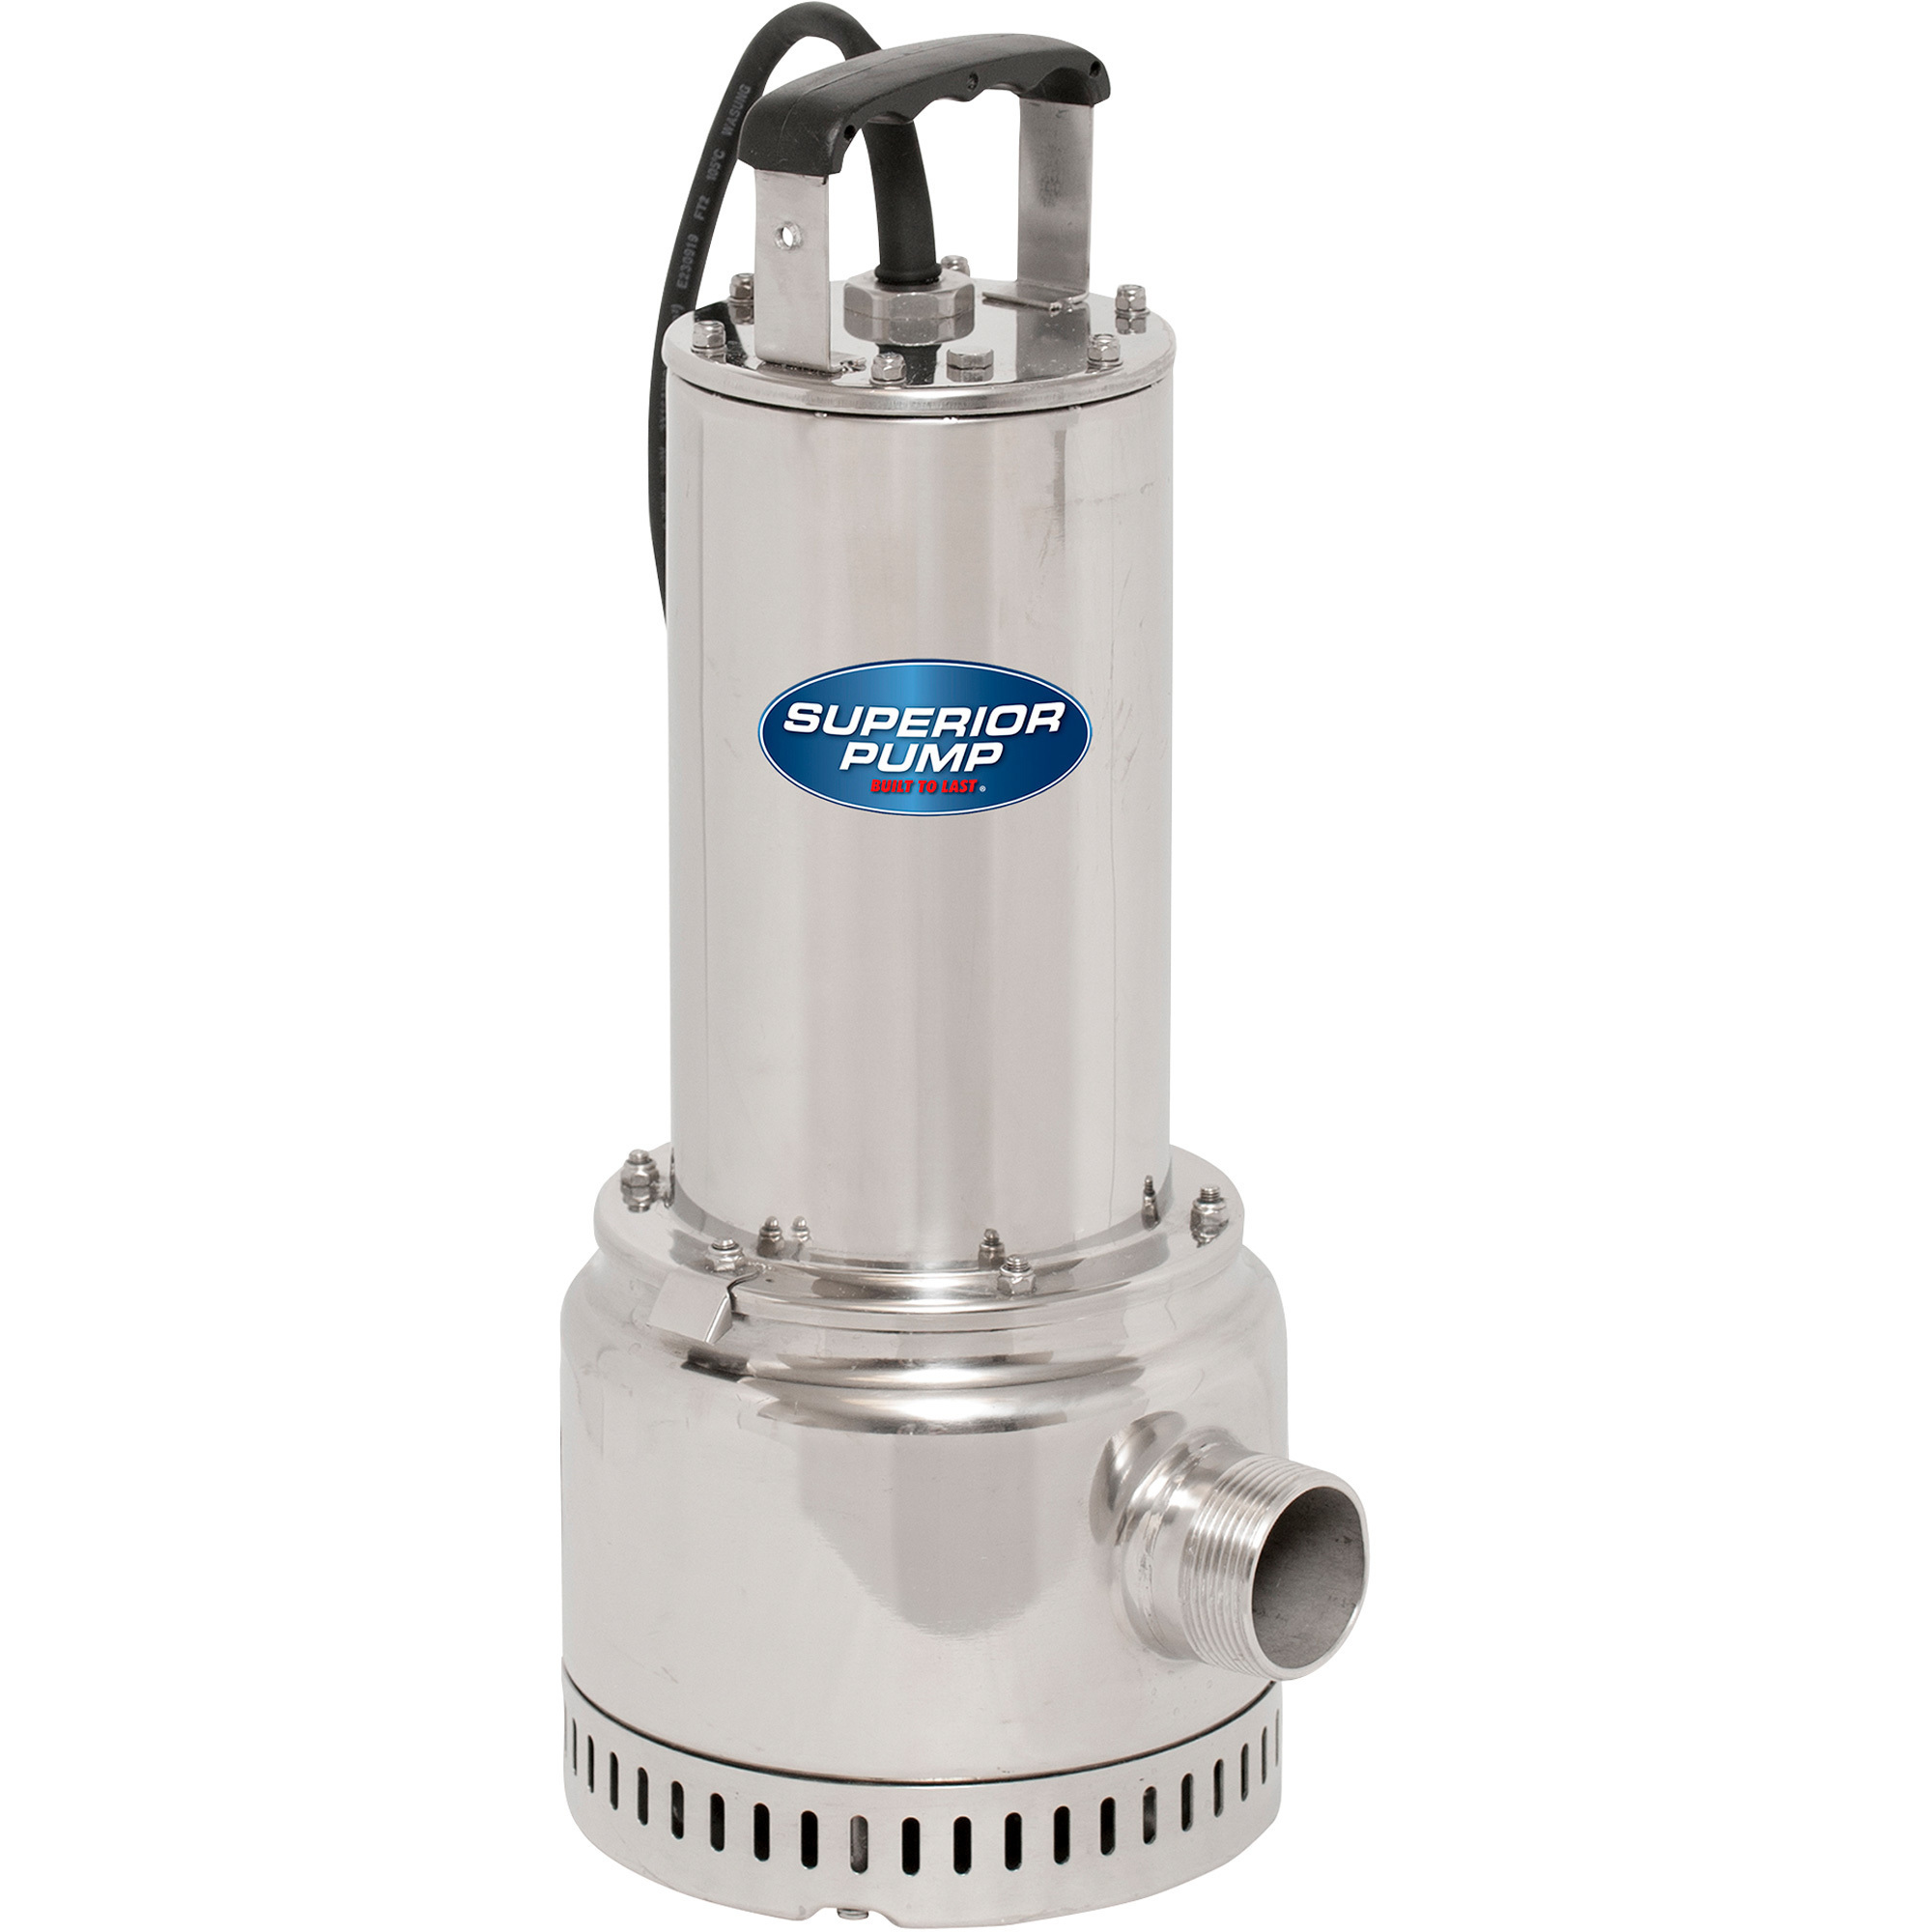 Superior Pump Stainless Steel Submersible Utility Pump â5898 GPH, 1 HP, Model 91187